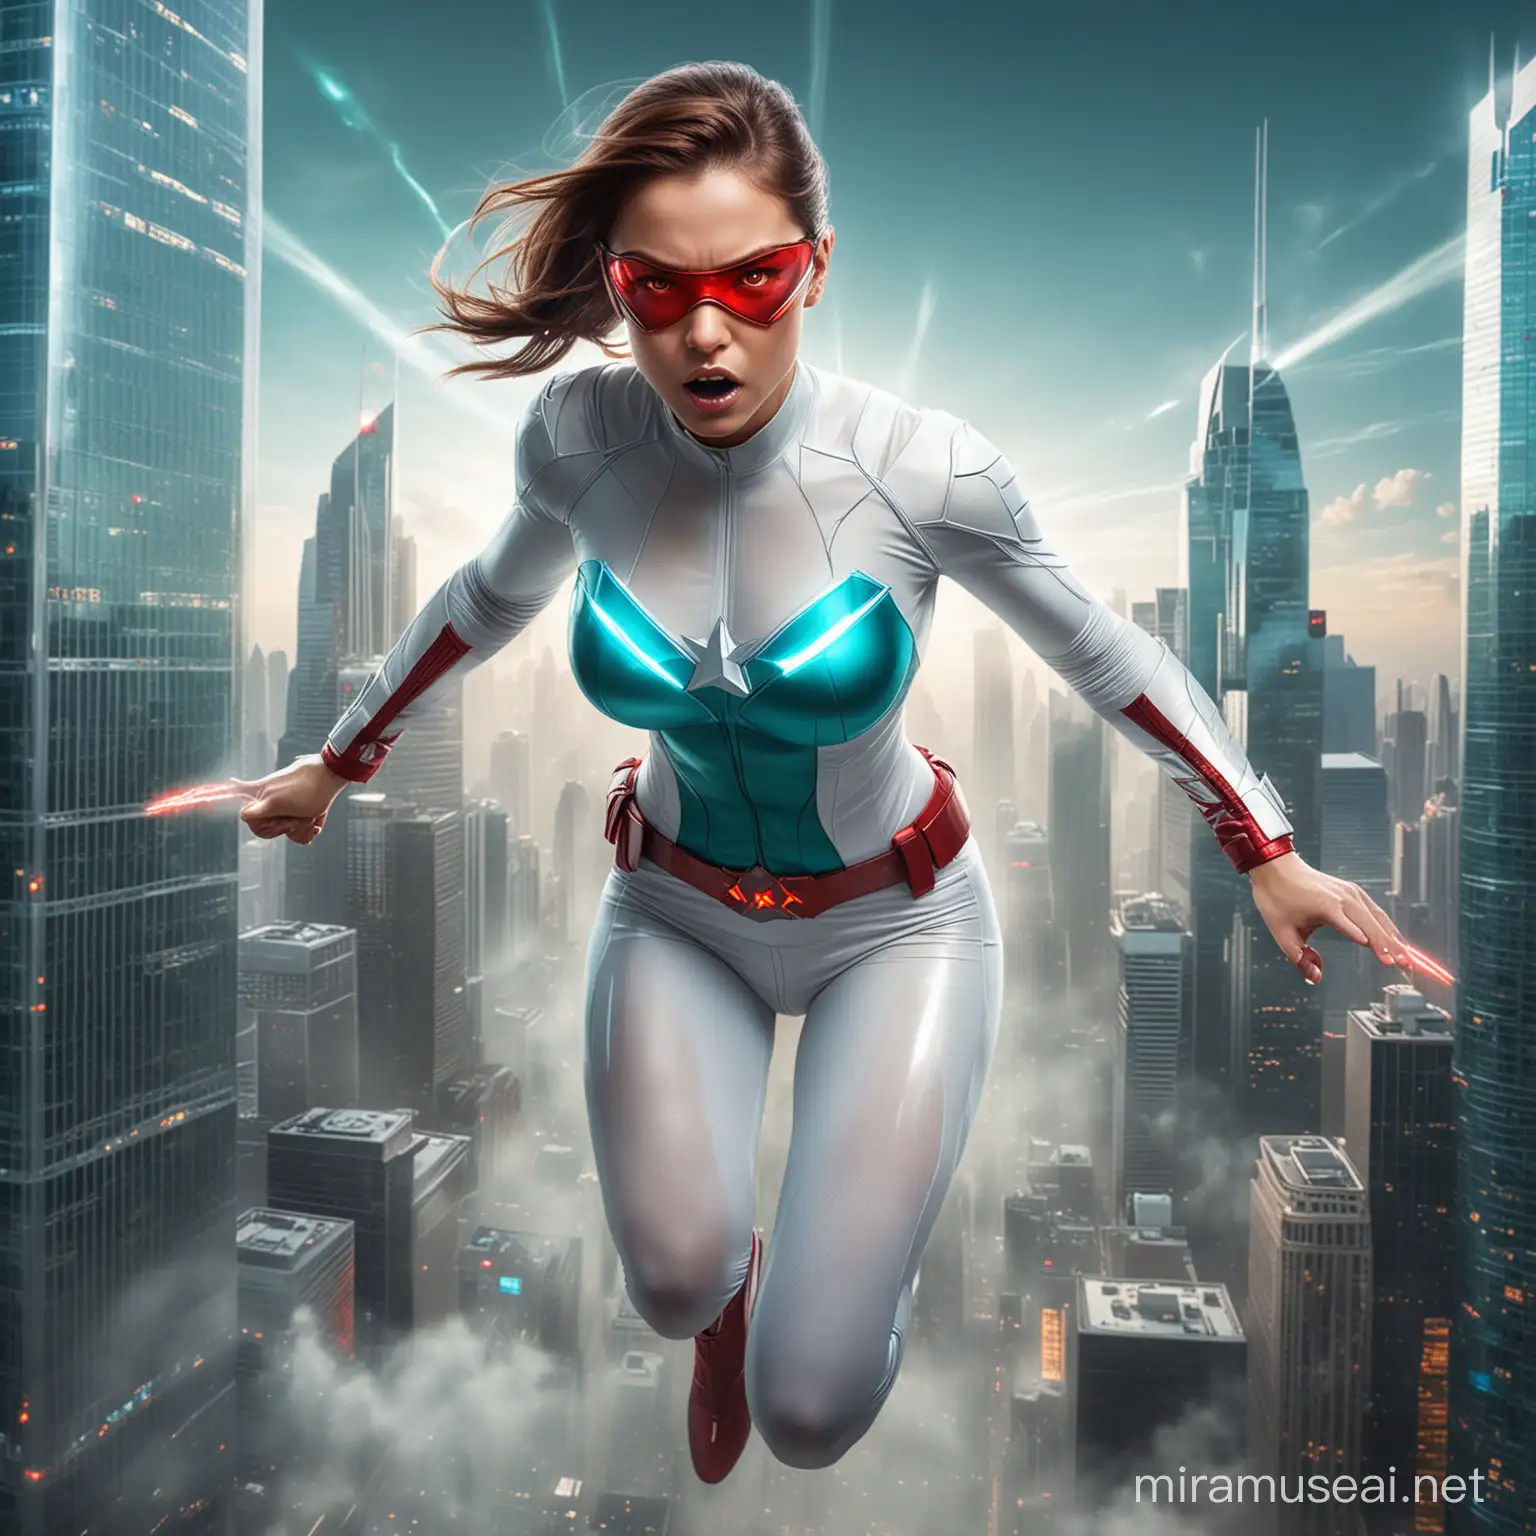 petite female super hero with glowing red laser eyes, wearing white transparent and teal tight clothing, angry,  flying over skyscrapers, full body